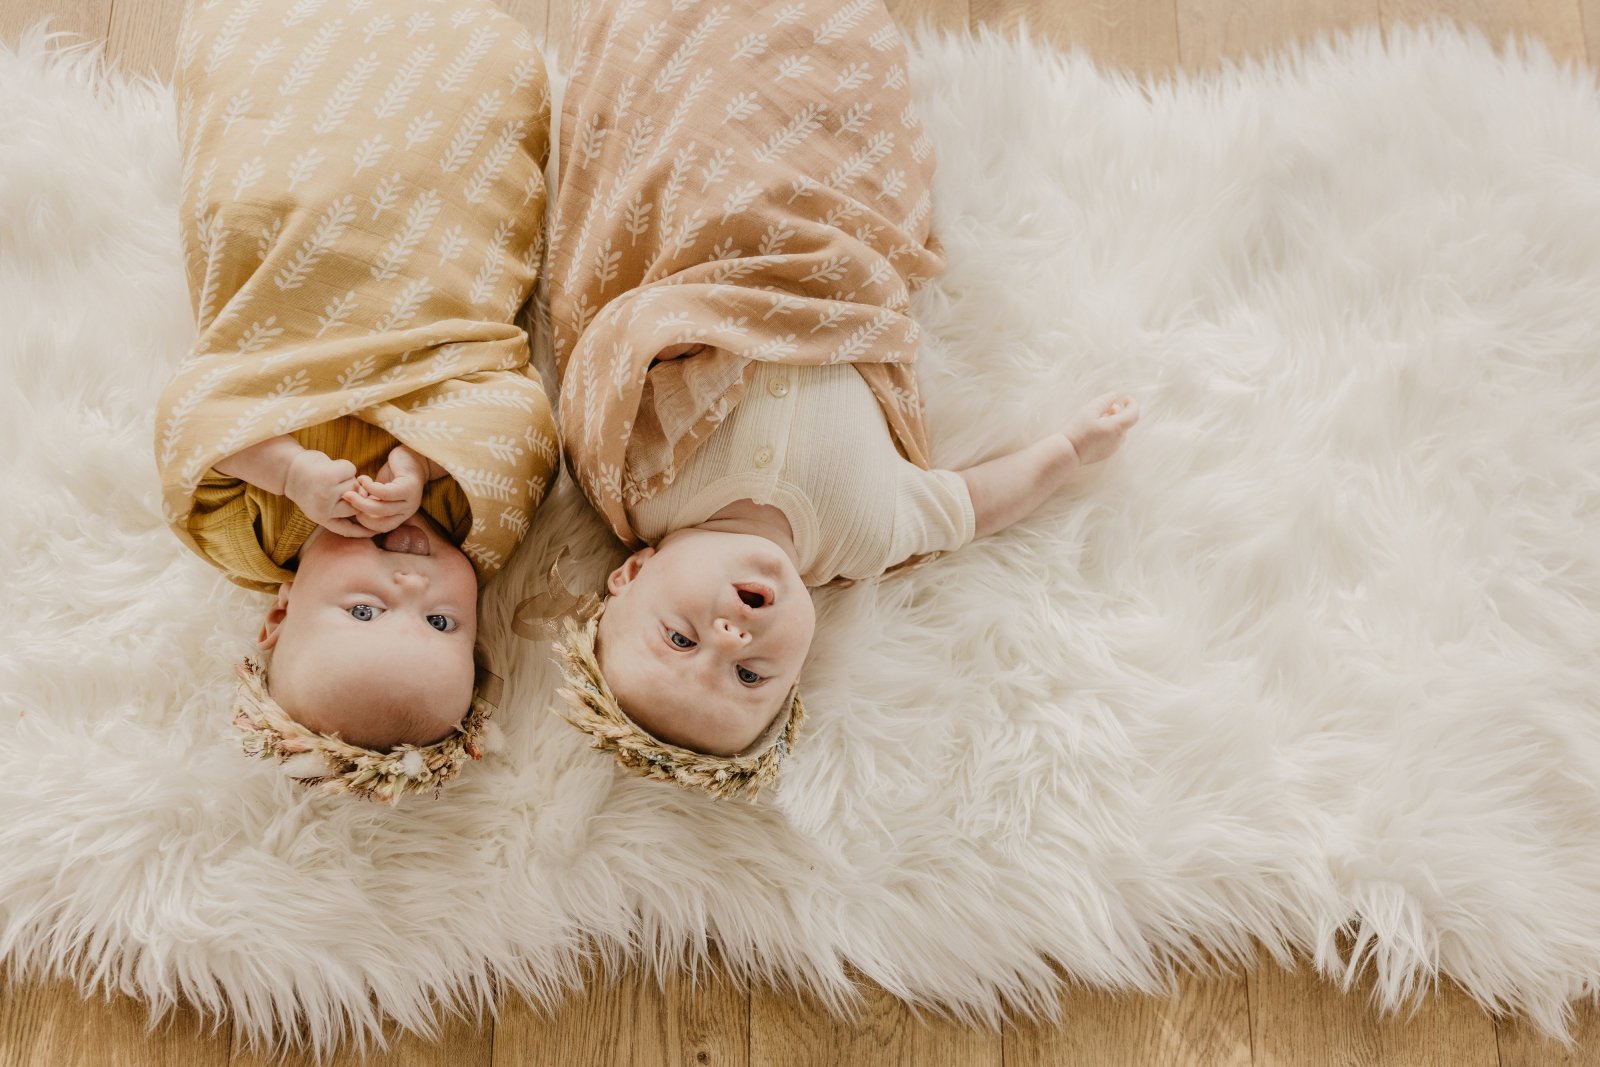 25 Gifts for Twins (Unique and Special Just Like They Are)